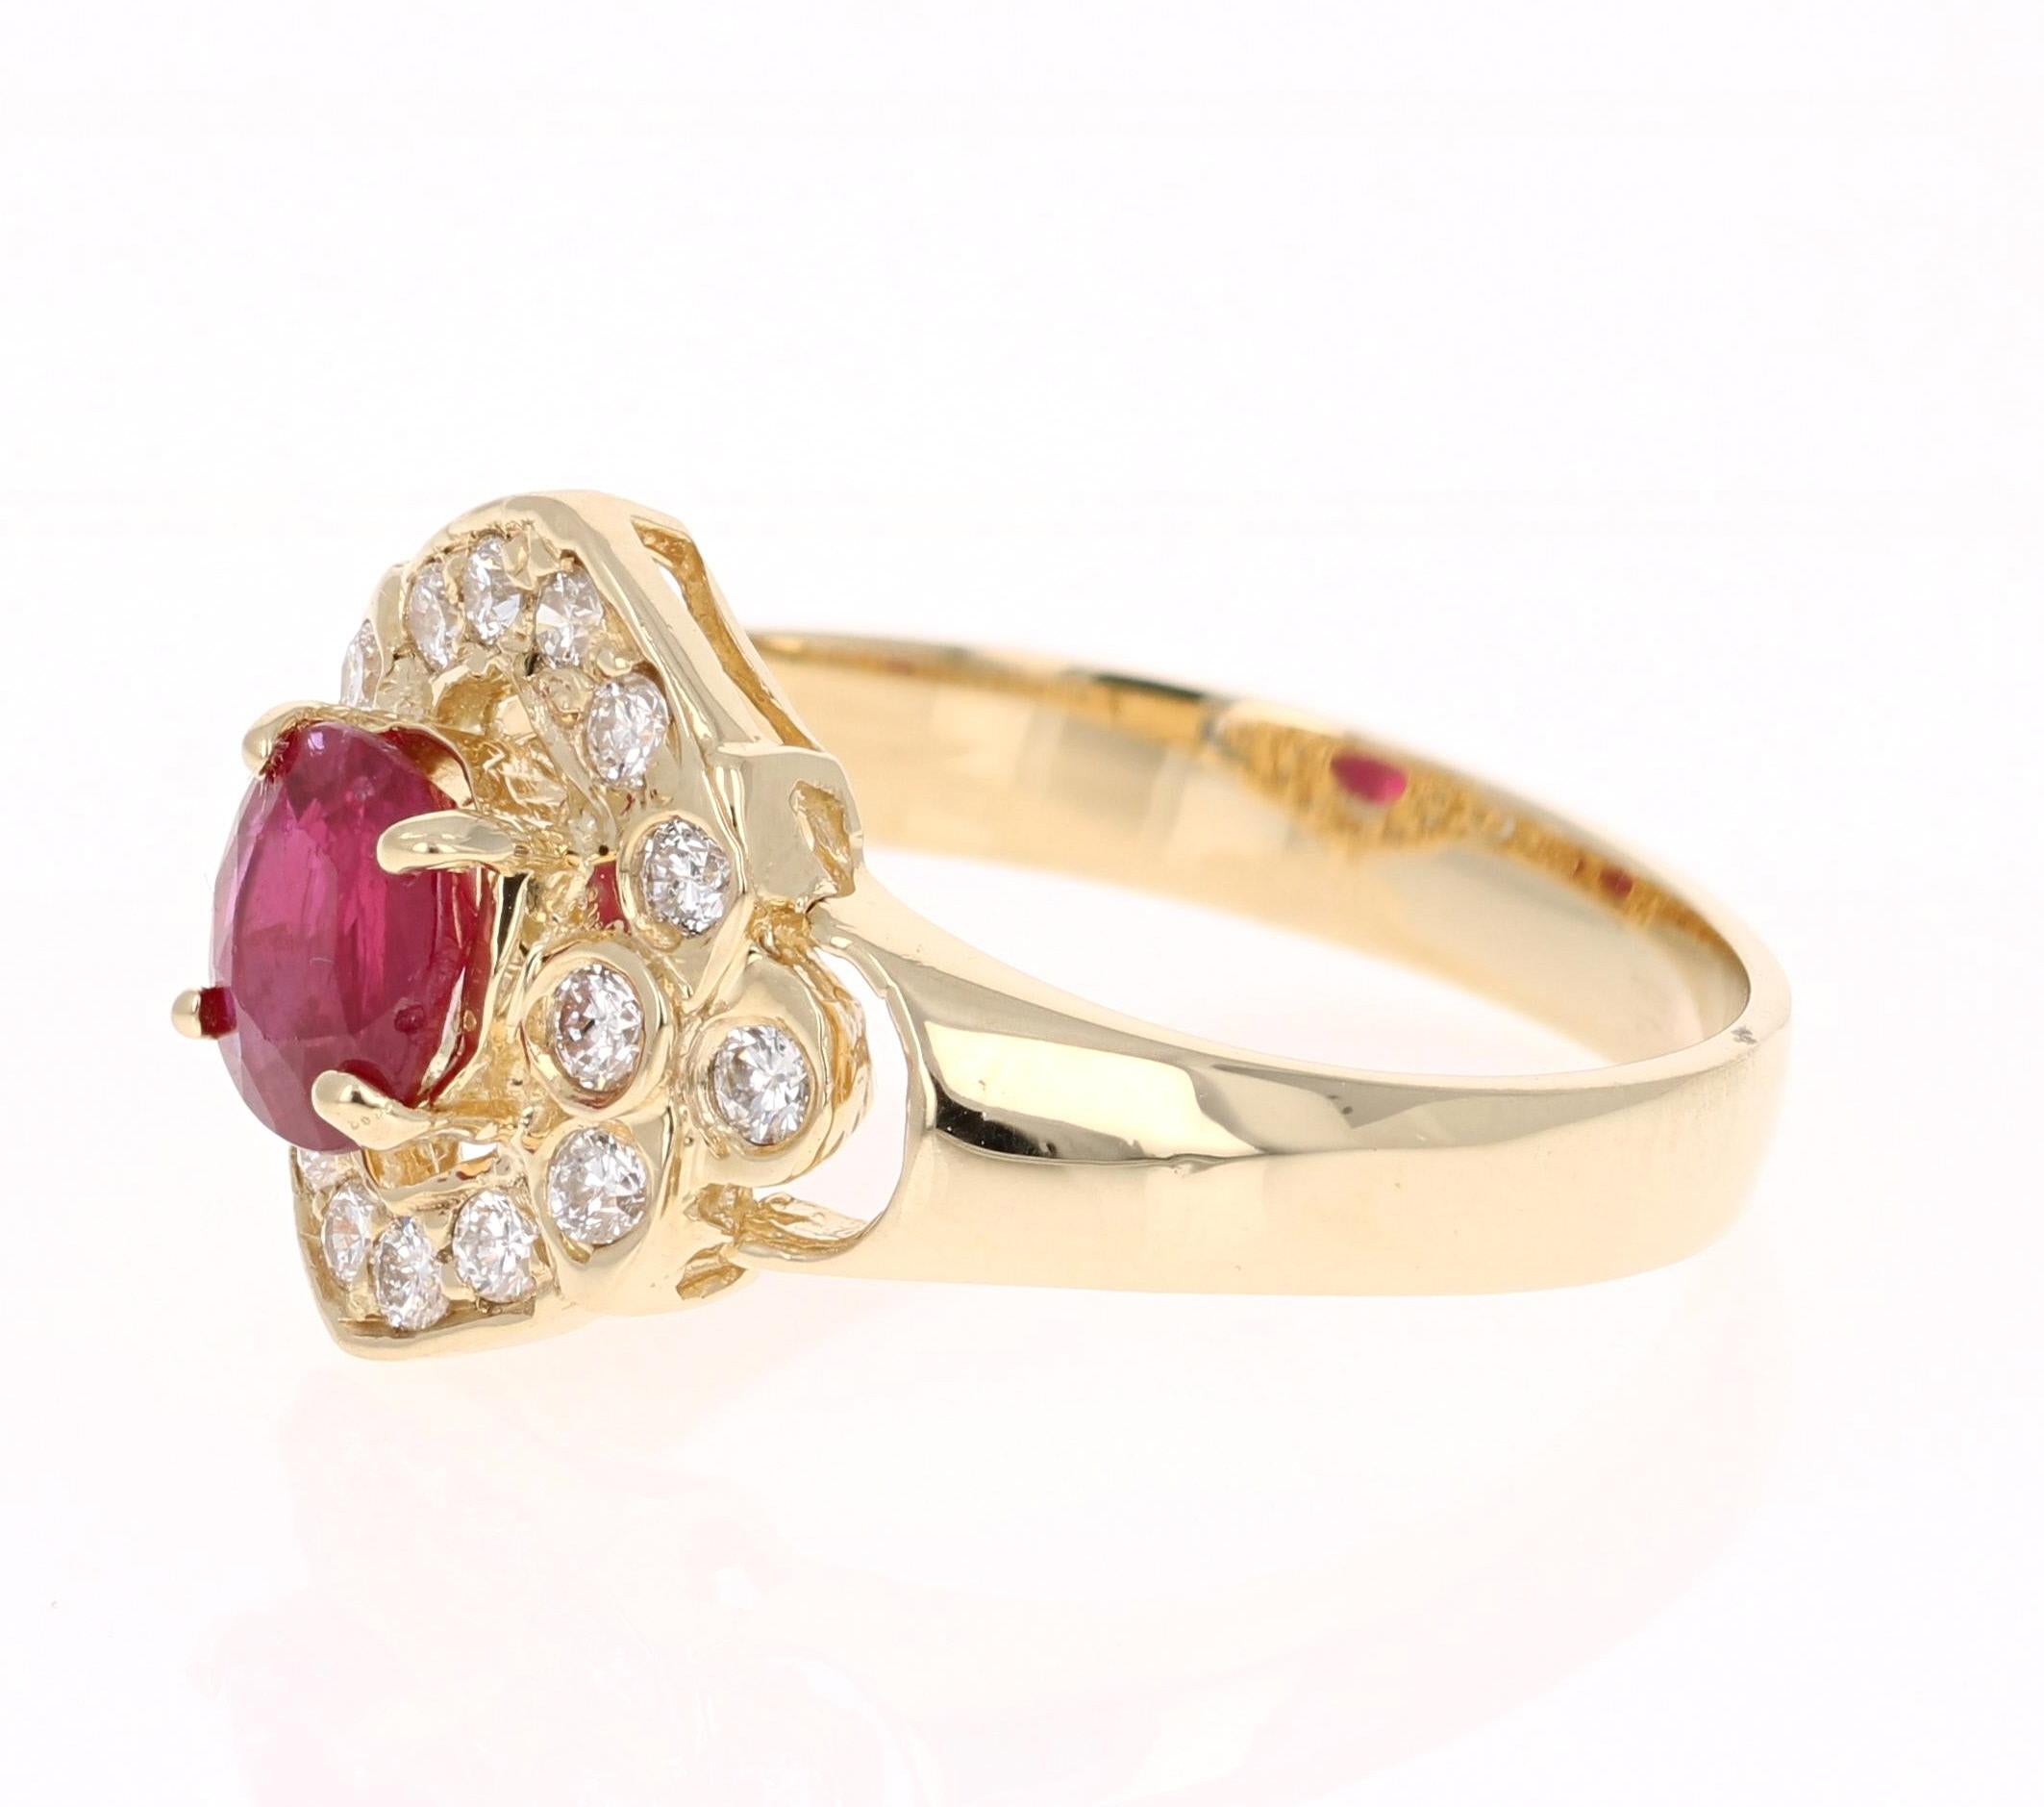 Contemporary 1.20 Carat Oval Cut Burmese Ruby Diamond 14 Karat Yellow Gold Cluster Ring For Sale